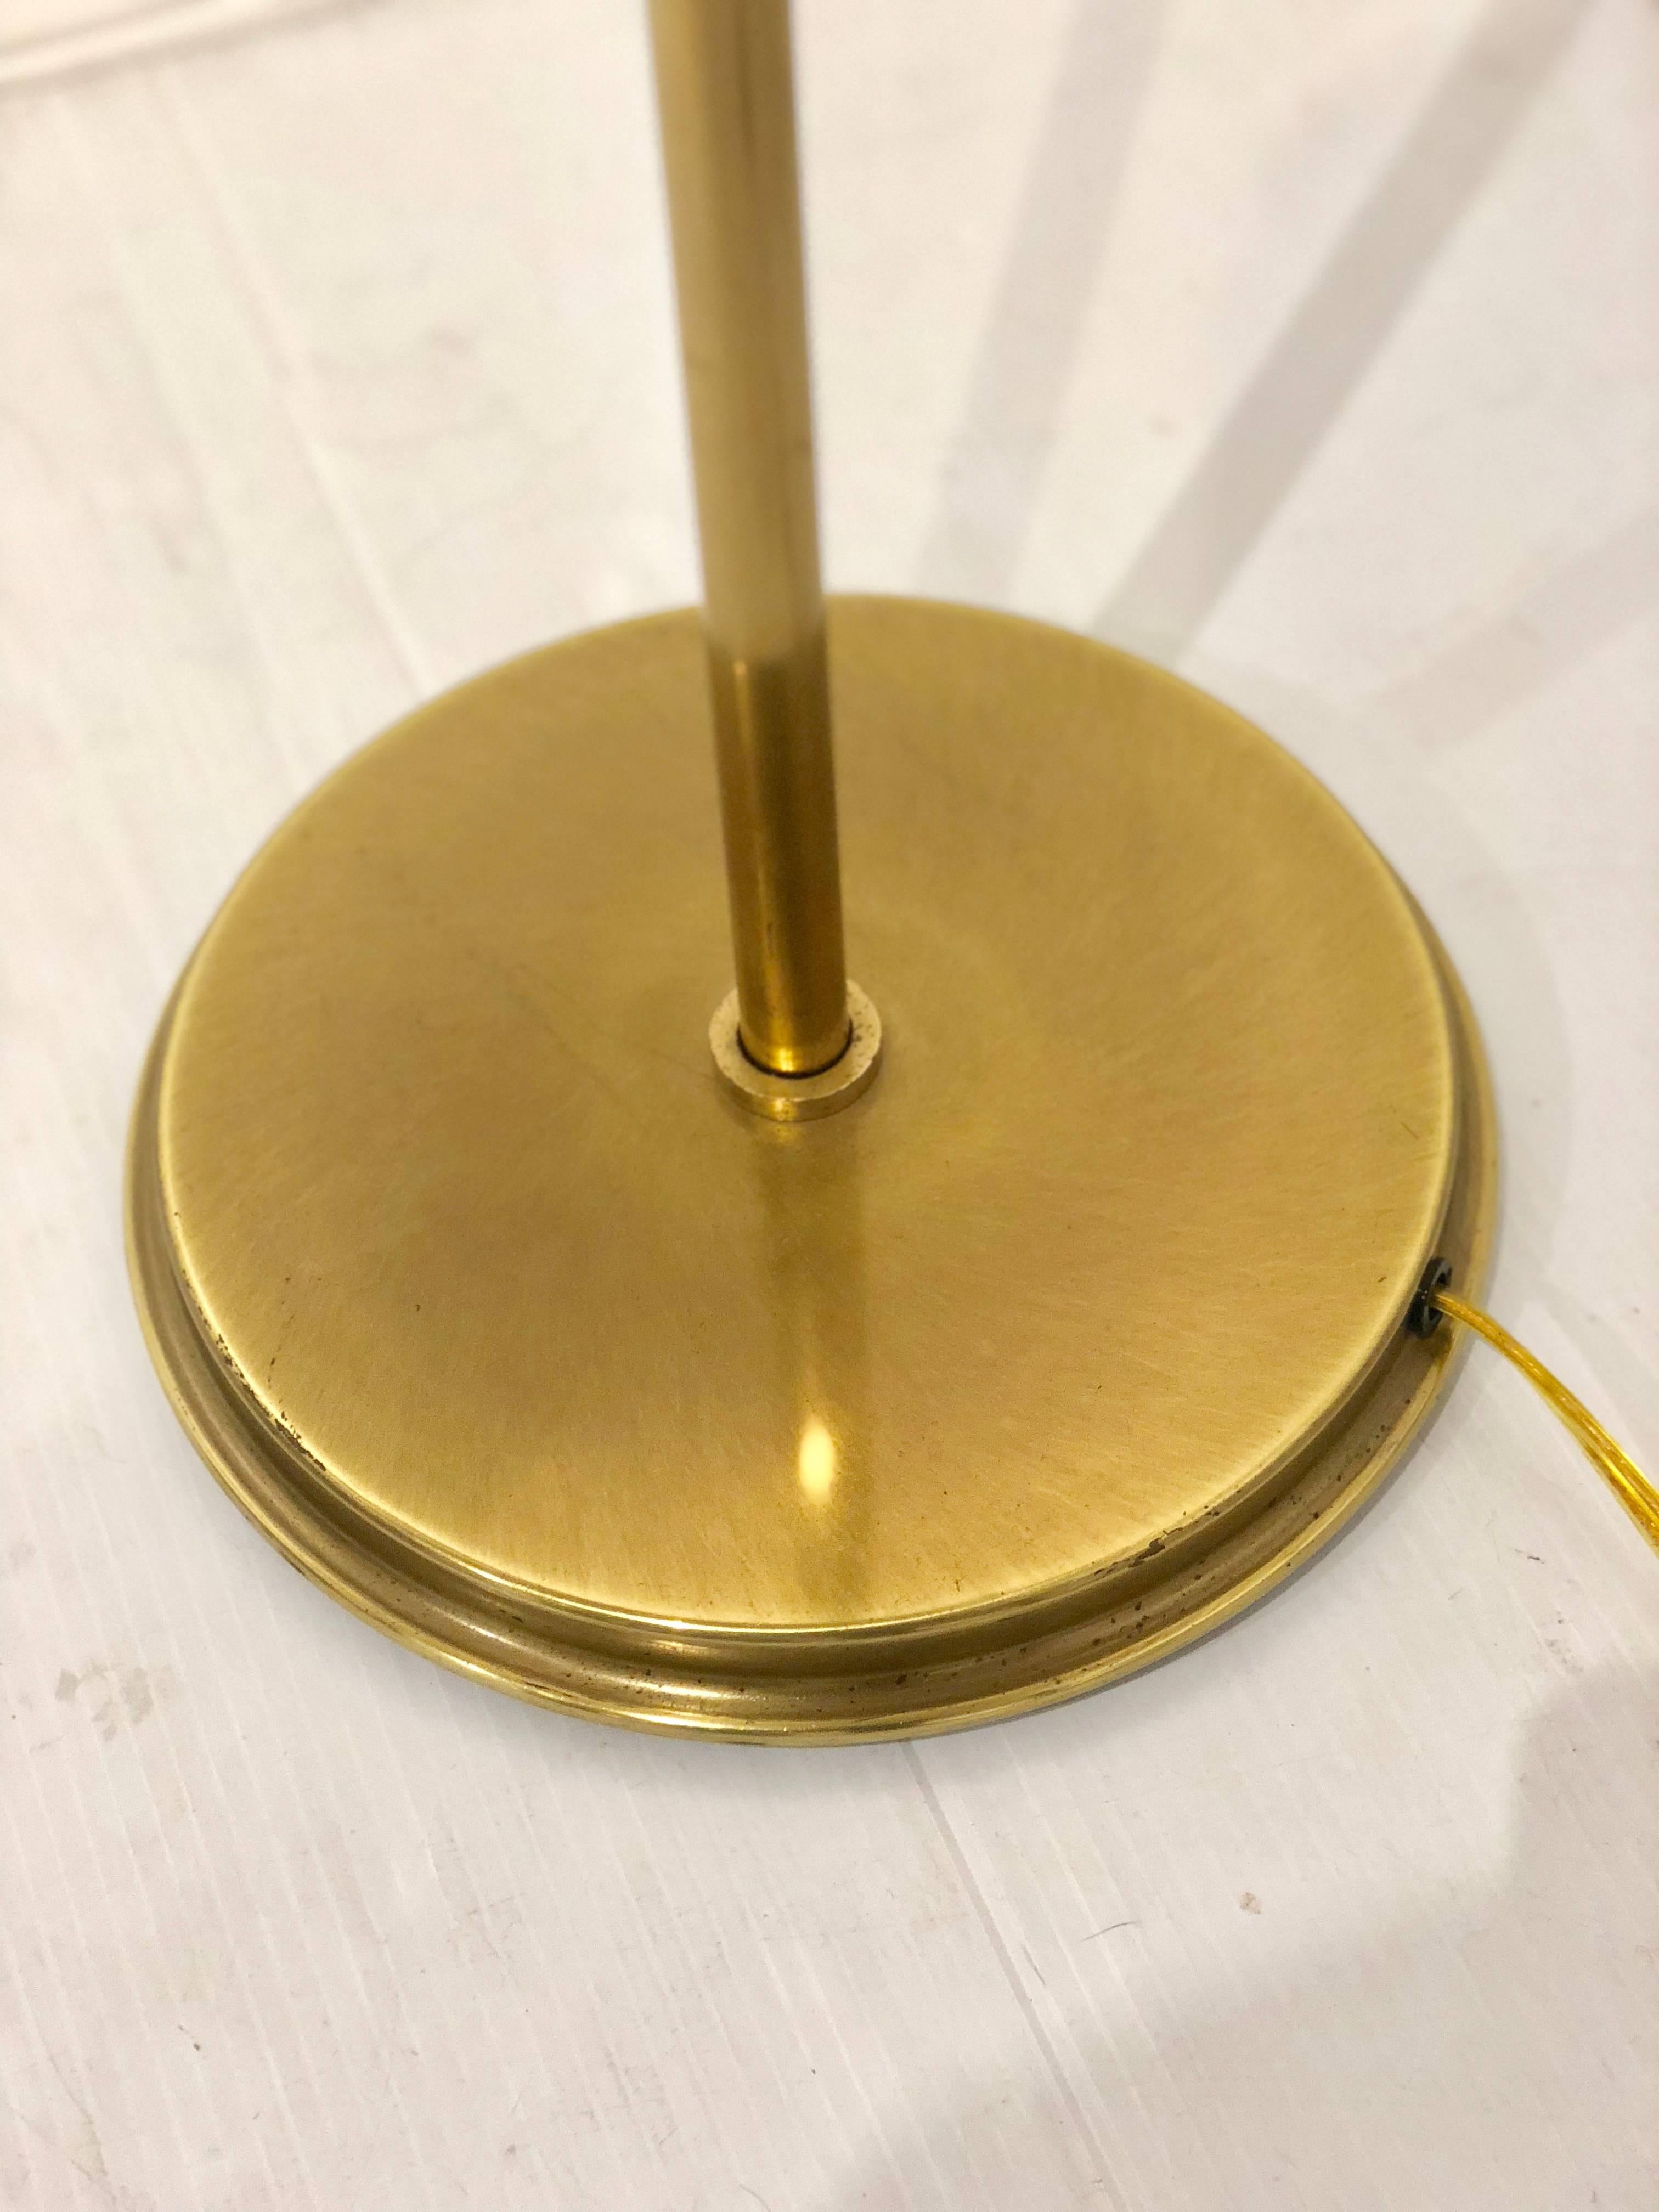 American Multidirectional Floor Lamp in Patinated Brass by Frederick Copper Lighting